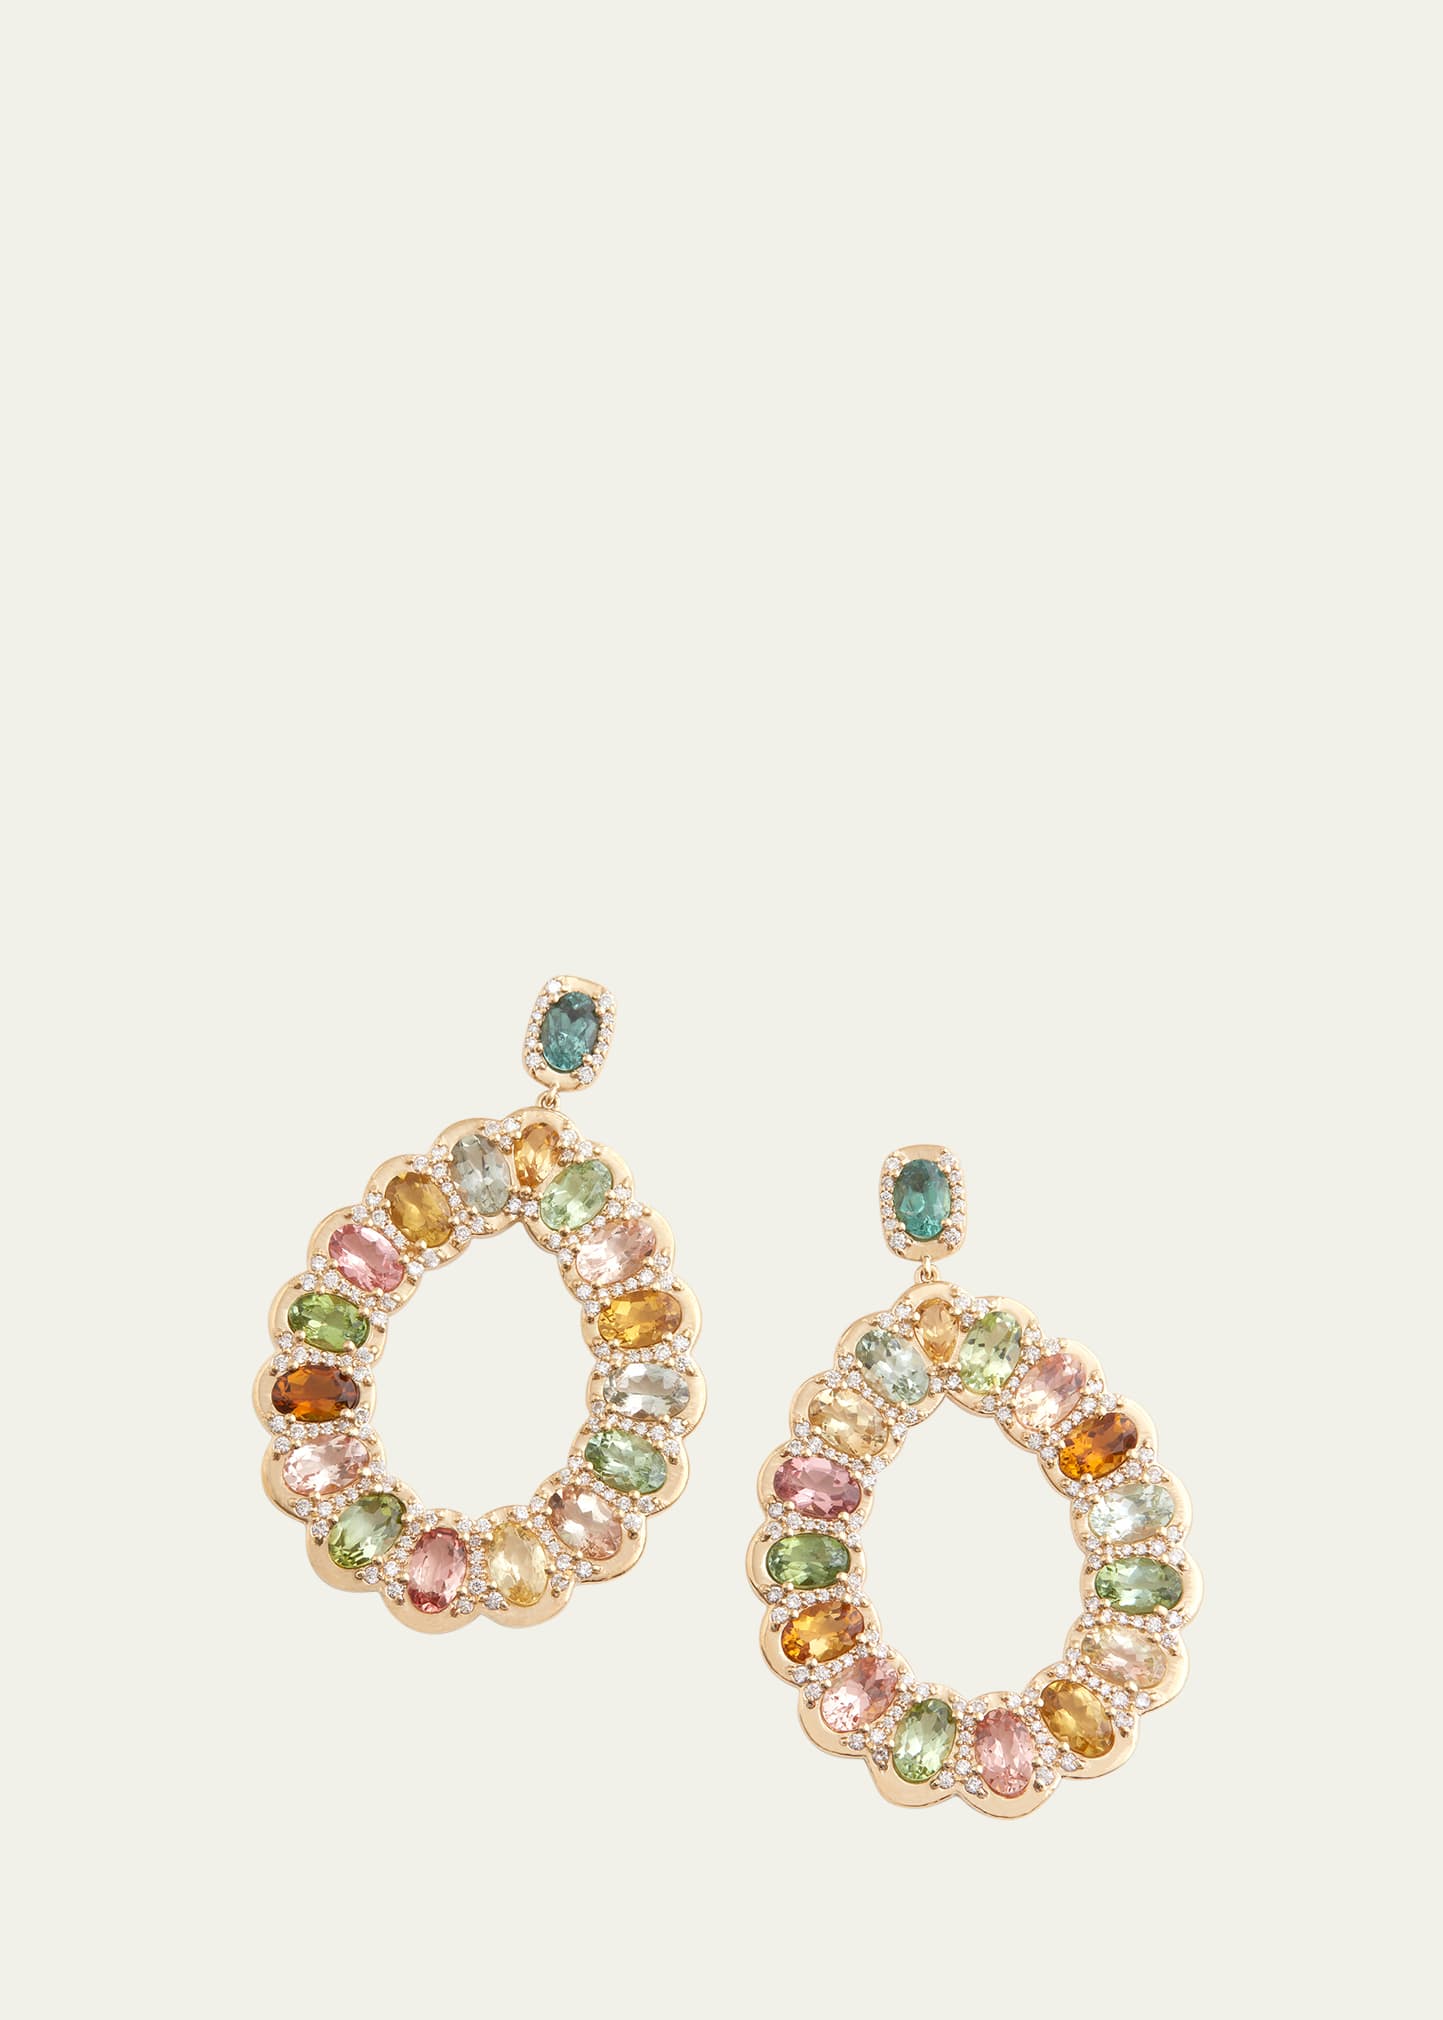 18K Yellow Gold Diamond Pear Shape Earrings with Multicolor Tourmalines